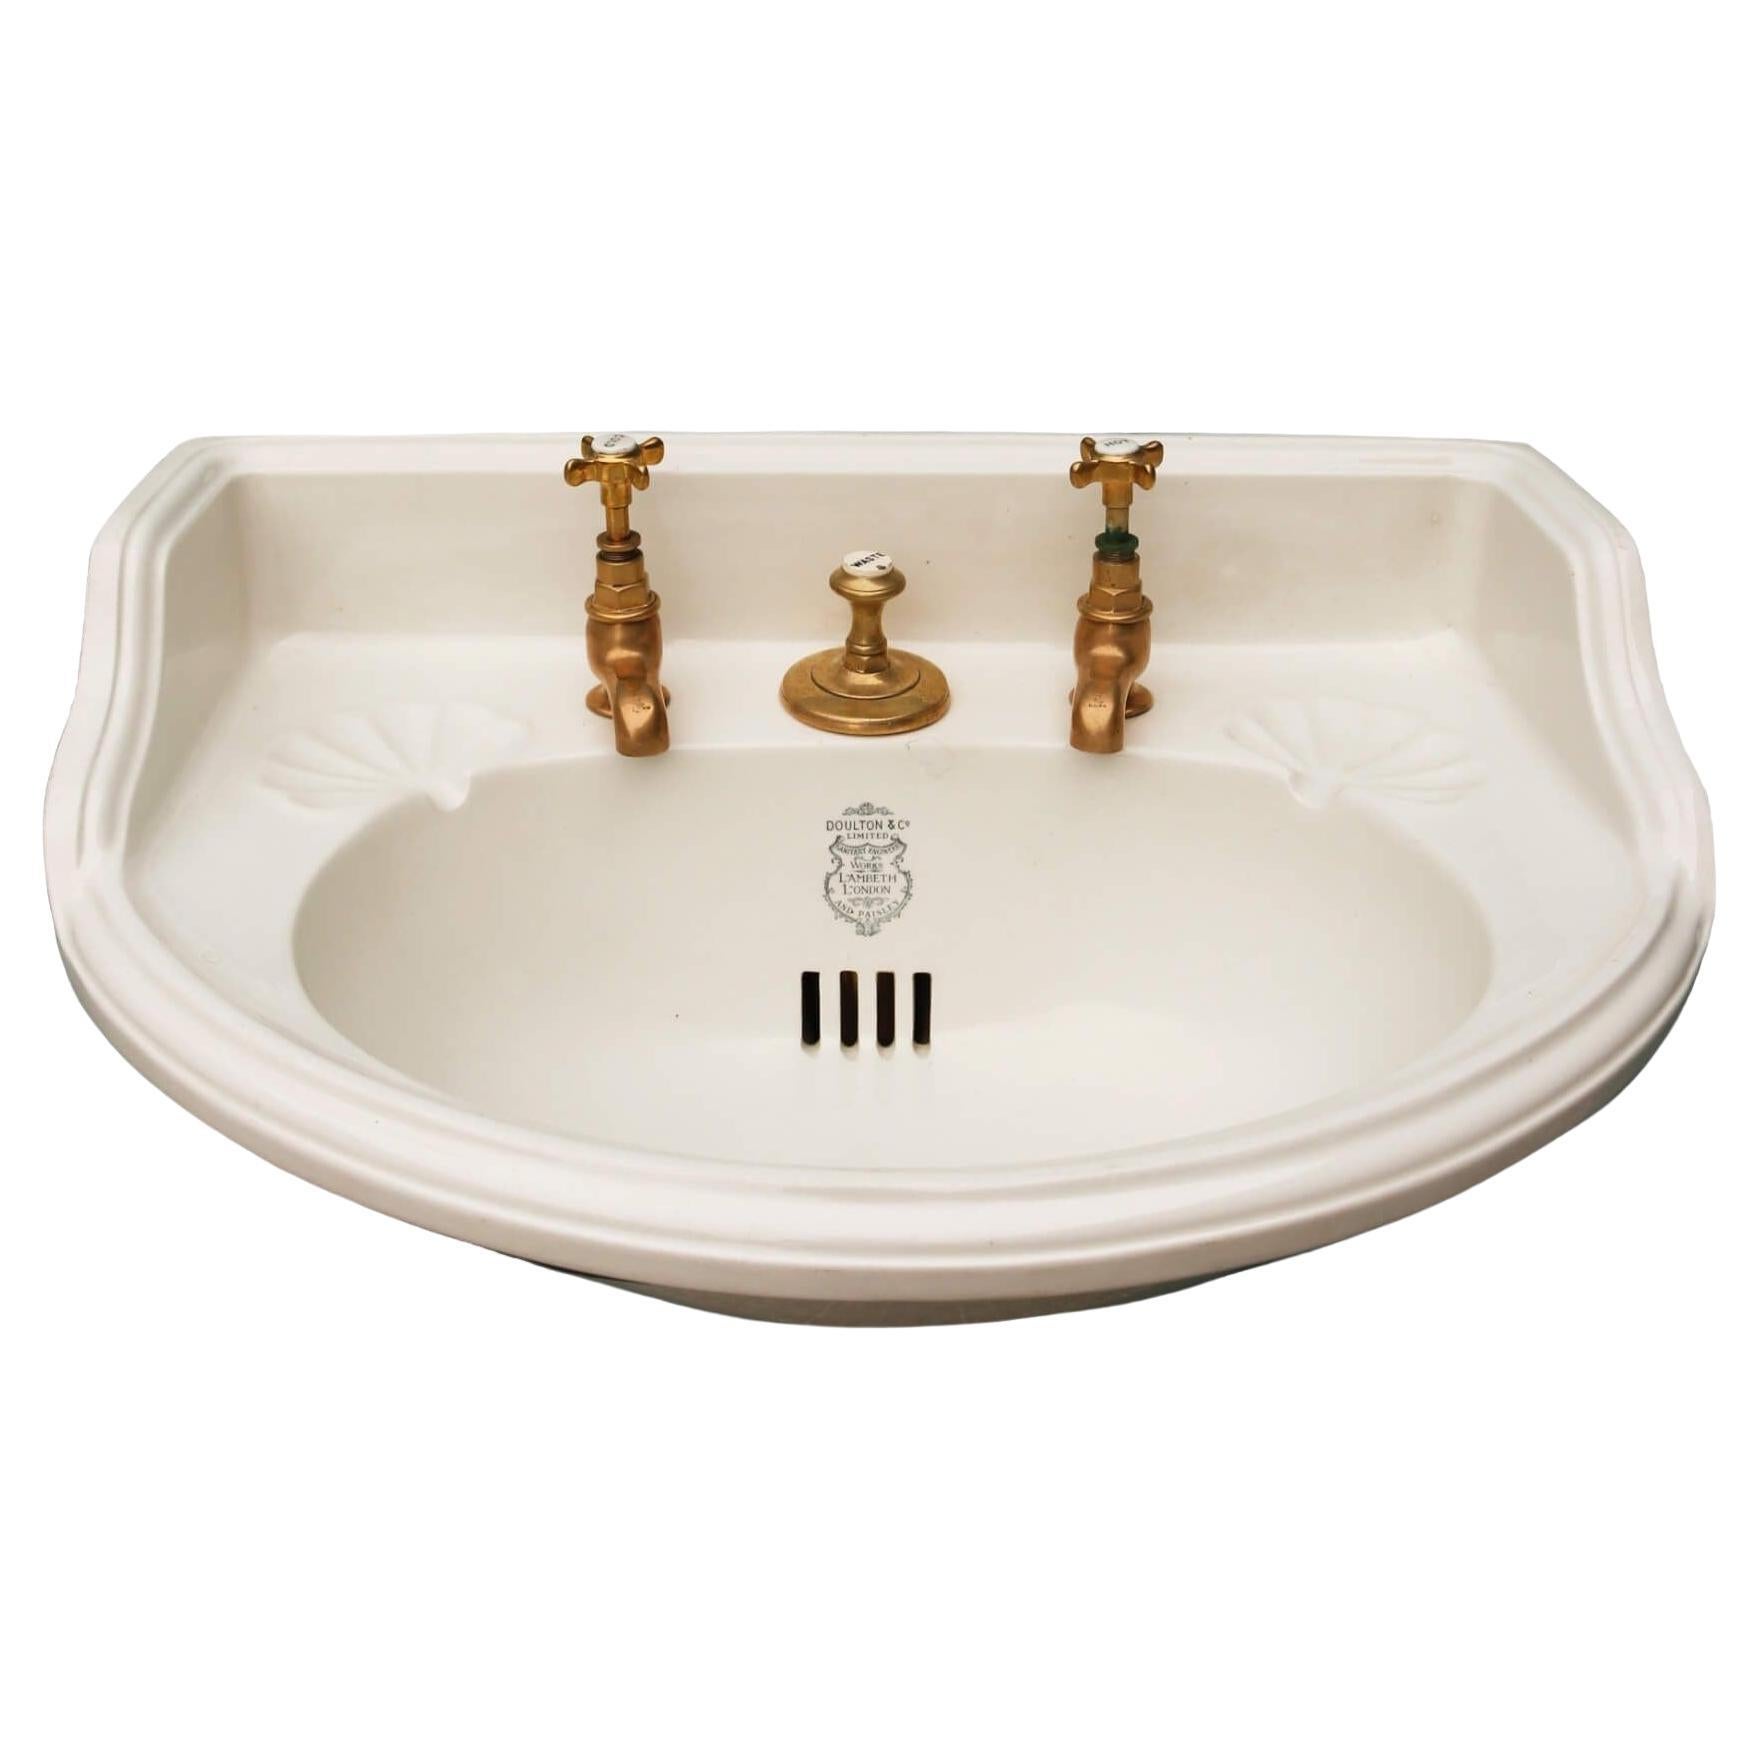 Doulton & Co. Curved Front Plunger Basin with Bracket For Sale